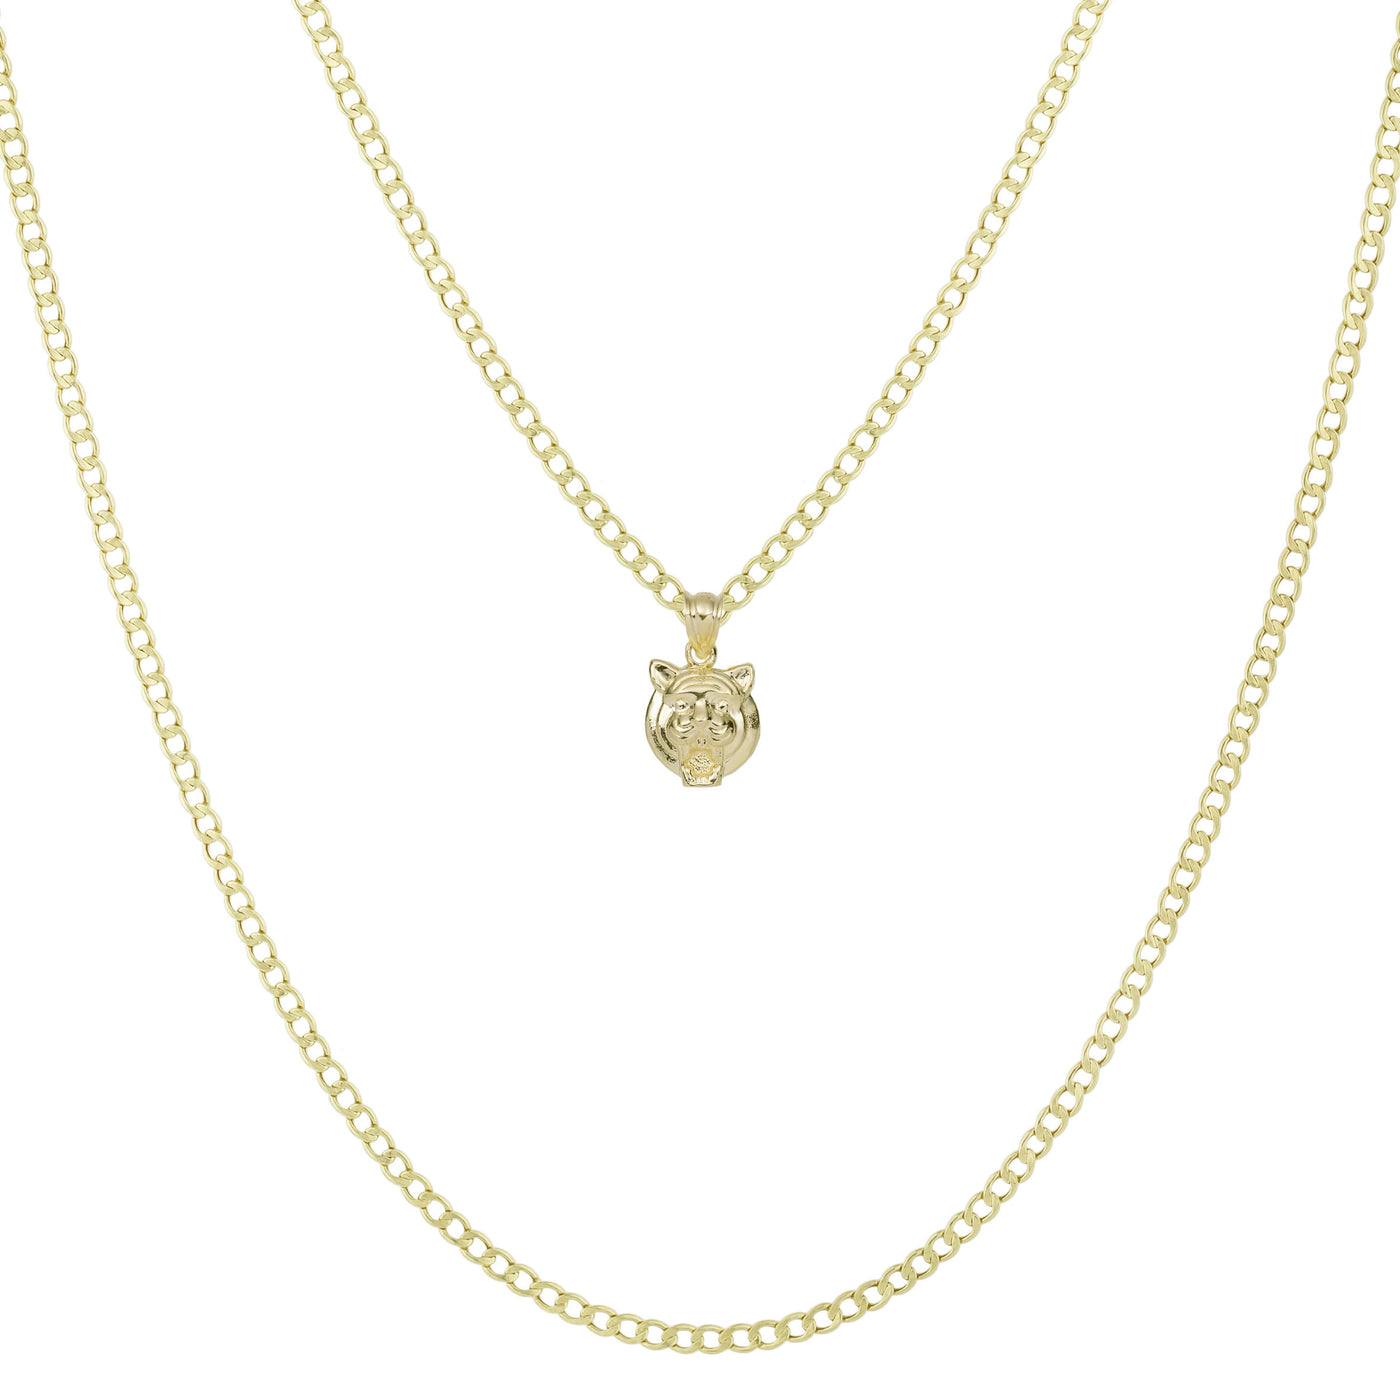 3/4" Tiger Face Pendant & Chain Necklace Set 10K Yellow Gold